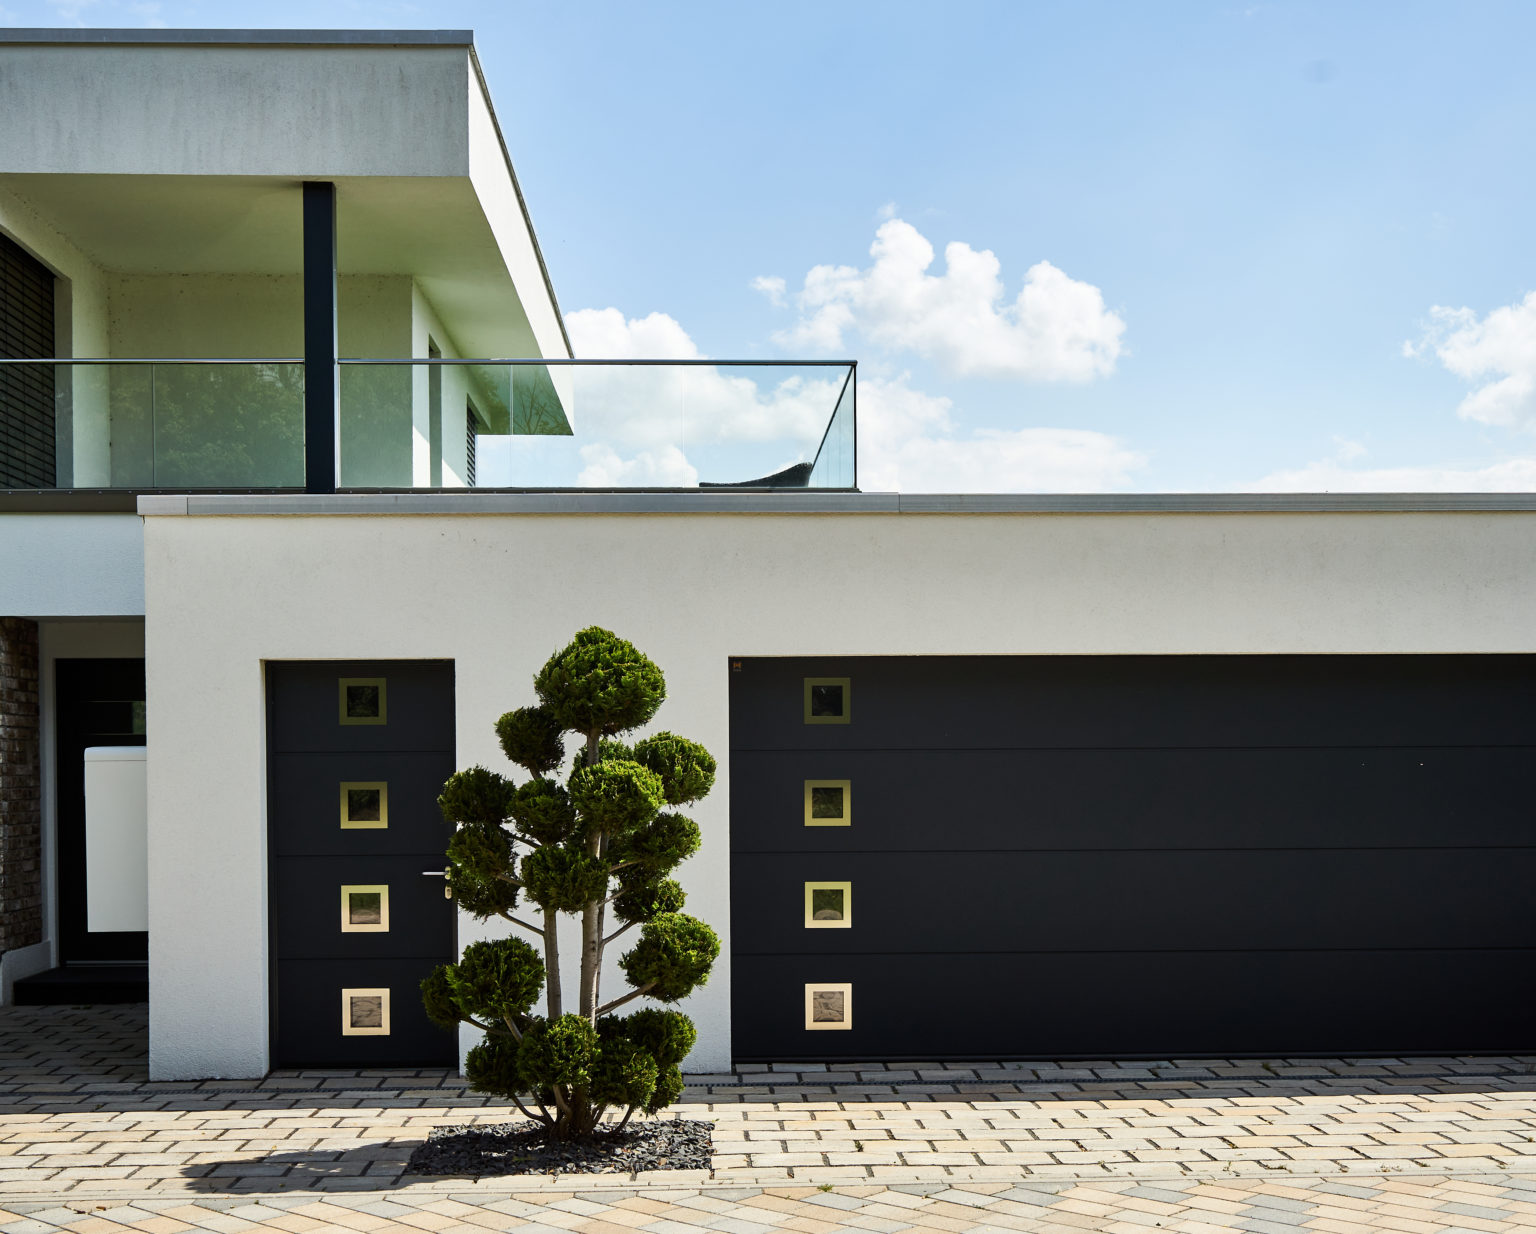 Entrance and garage of a house in minimalist design, with an unnaturally trimmed tree, view from public ground